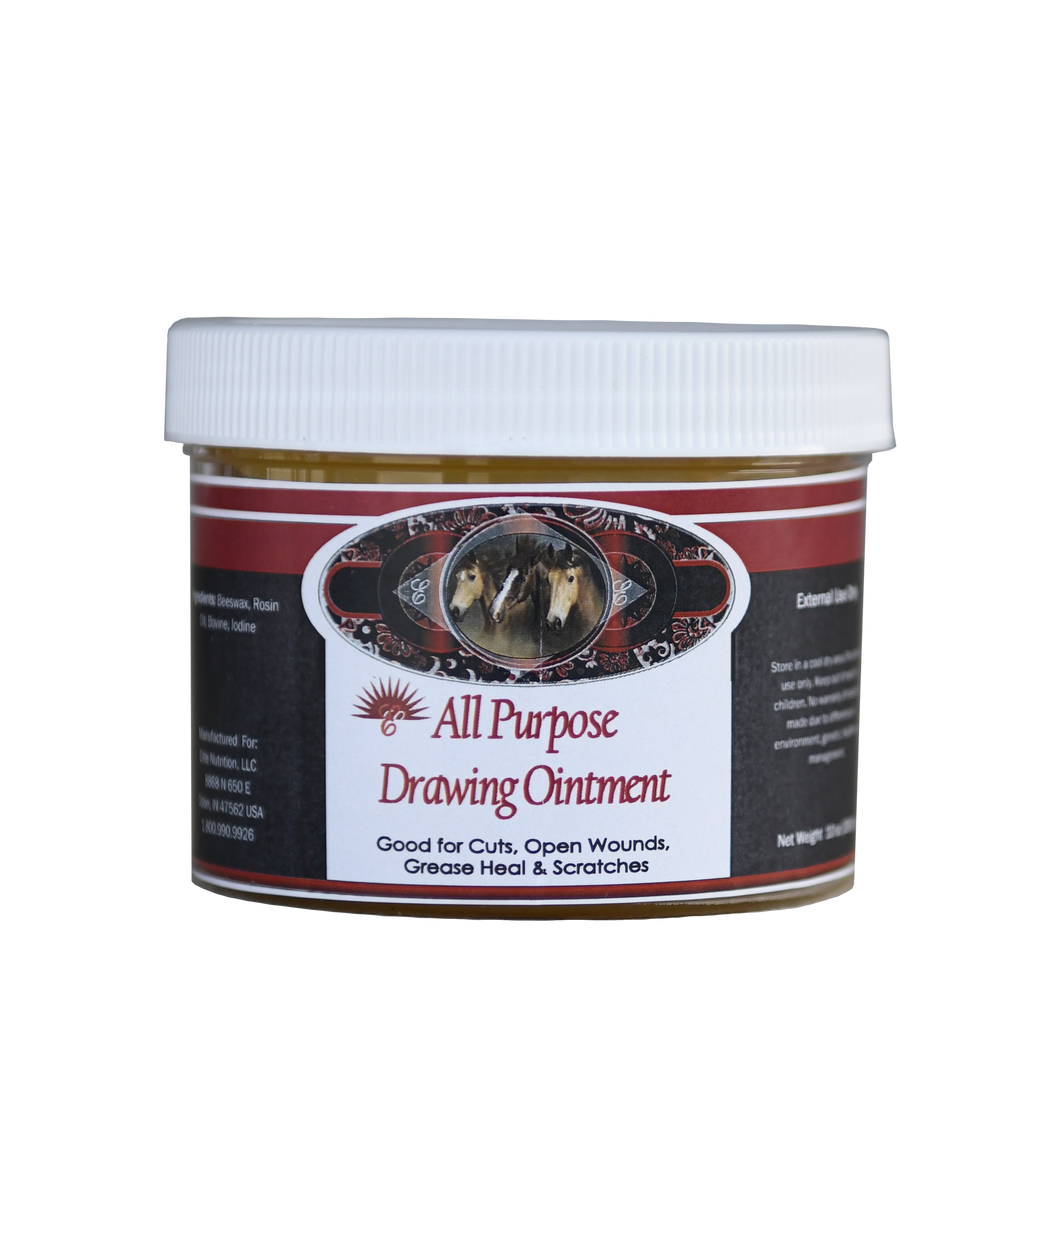 All Purpose Drawing Ointment